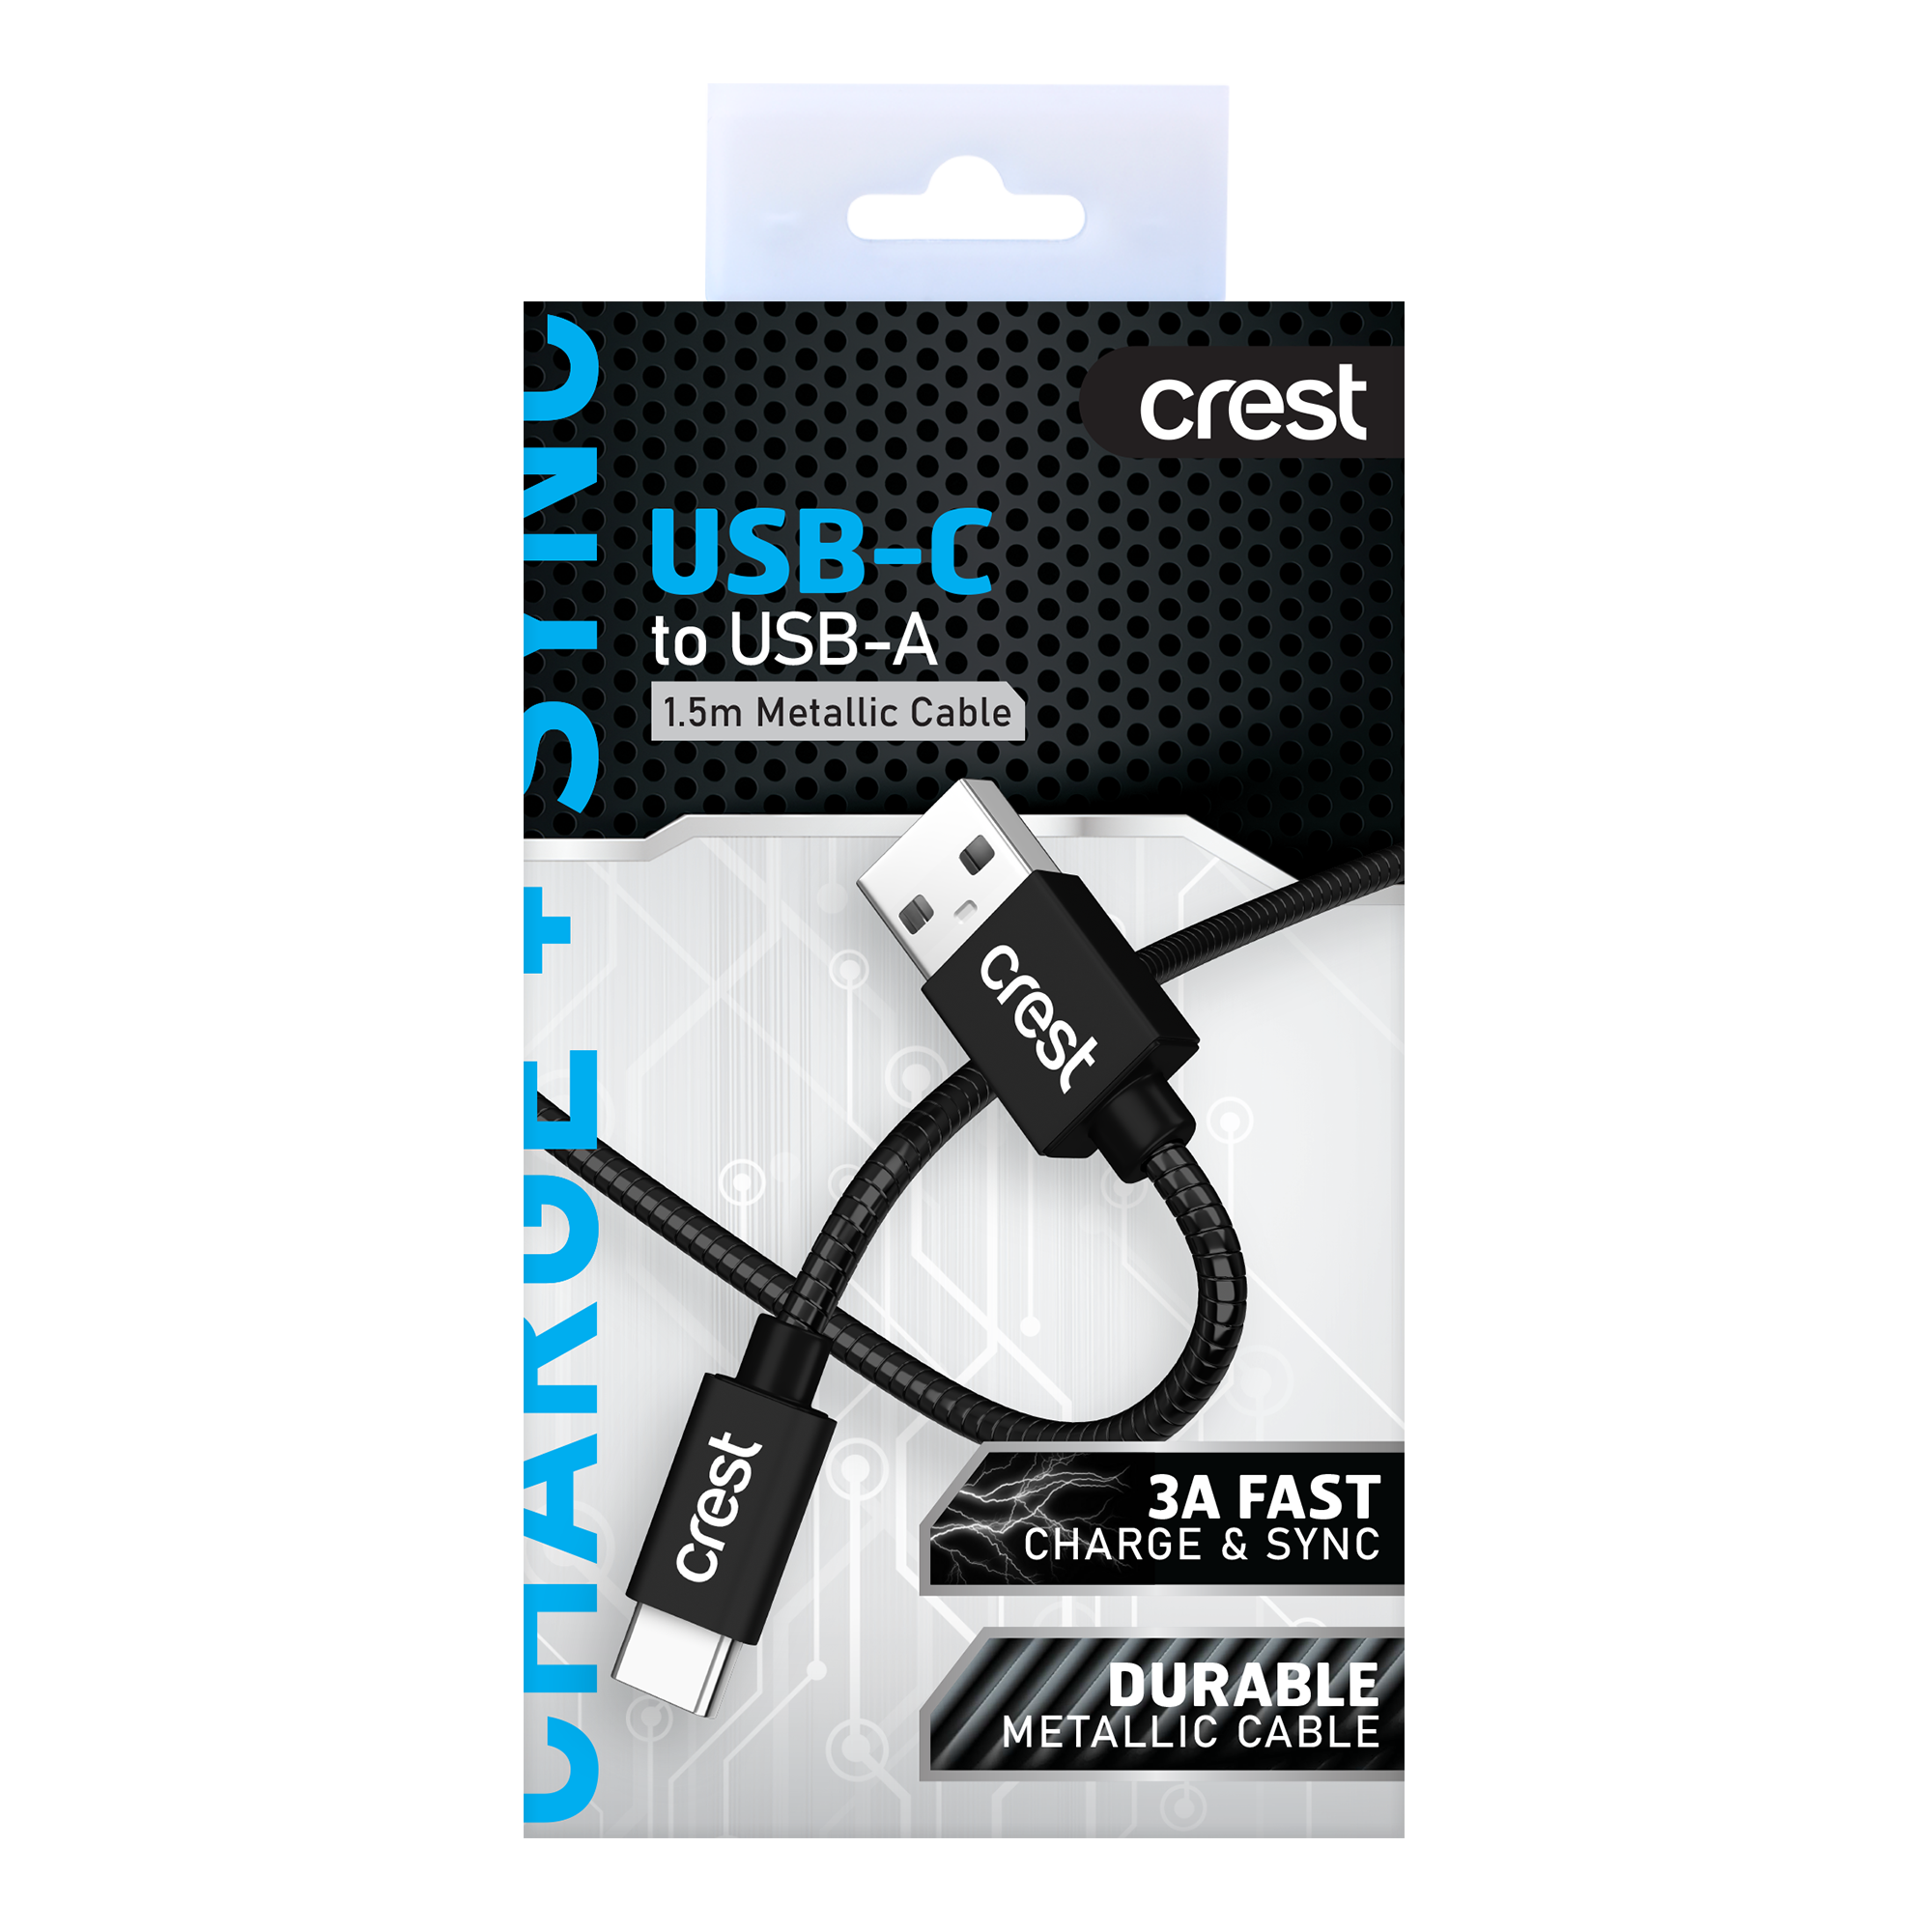 USB-C to USB-A Steel Cable 1.5M - Black